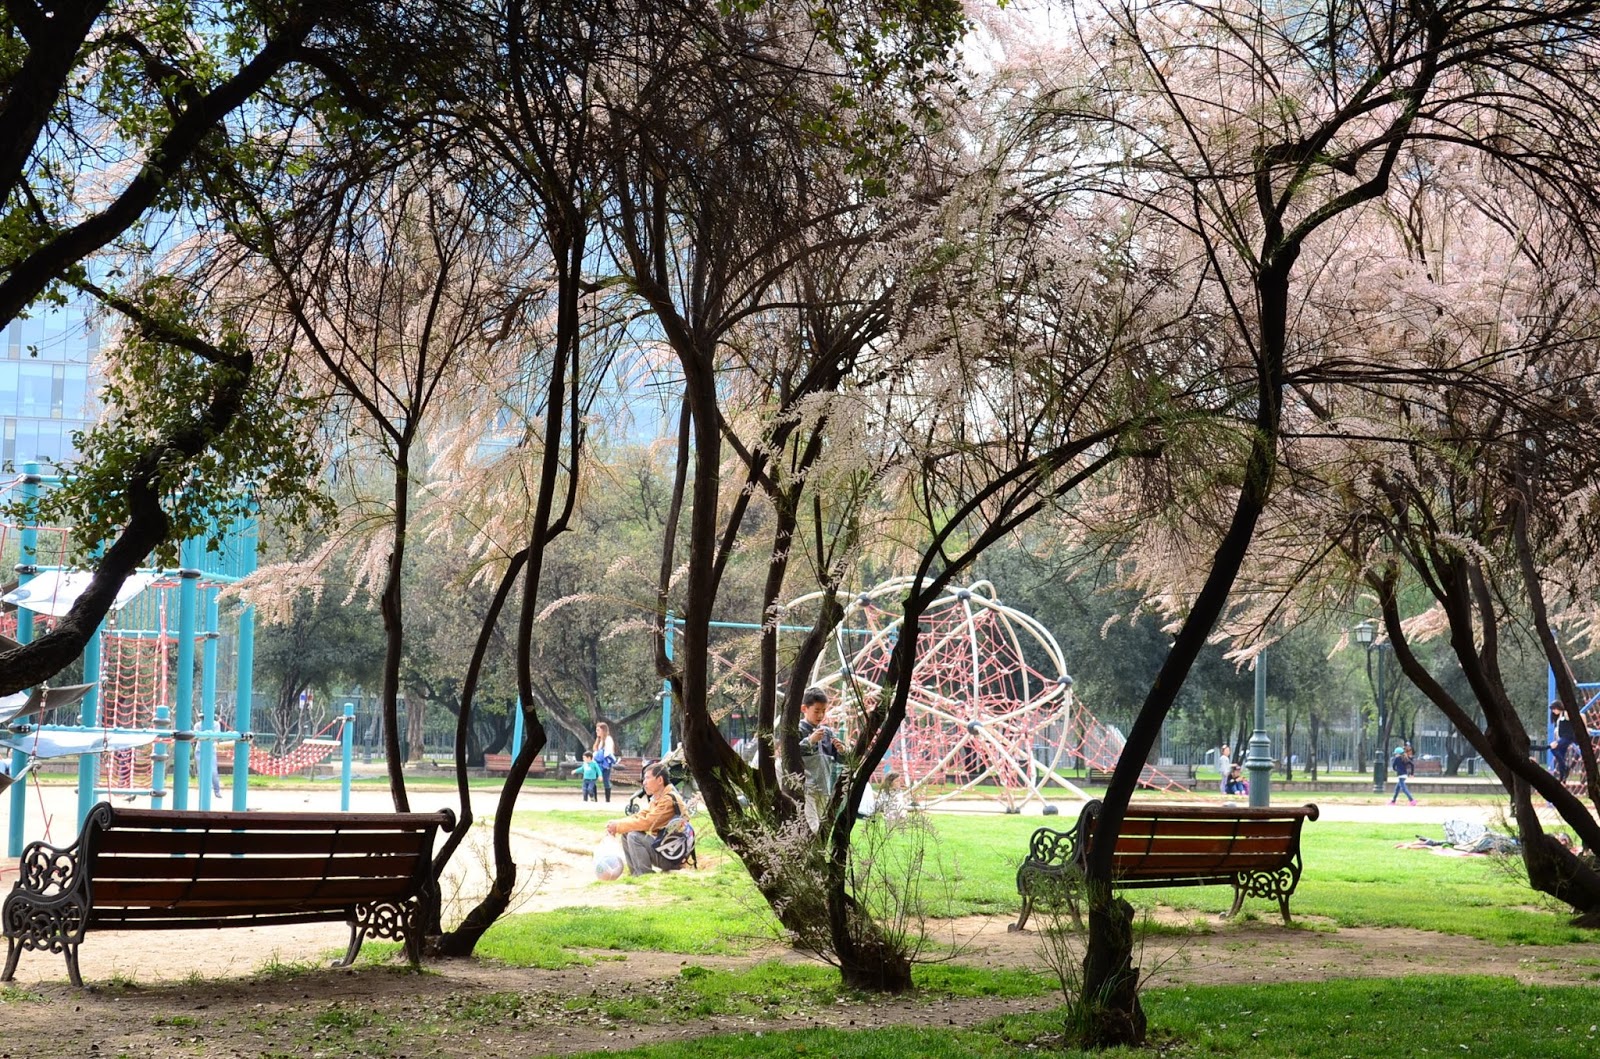 The Practical Mom: Santiago, Chile (Show Me Your Neighbourhood Around the World Series)